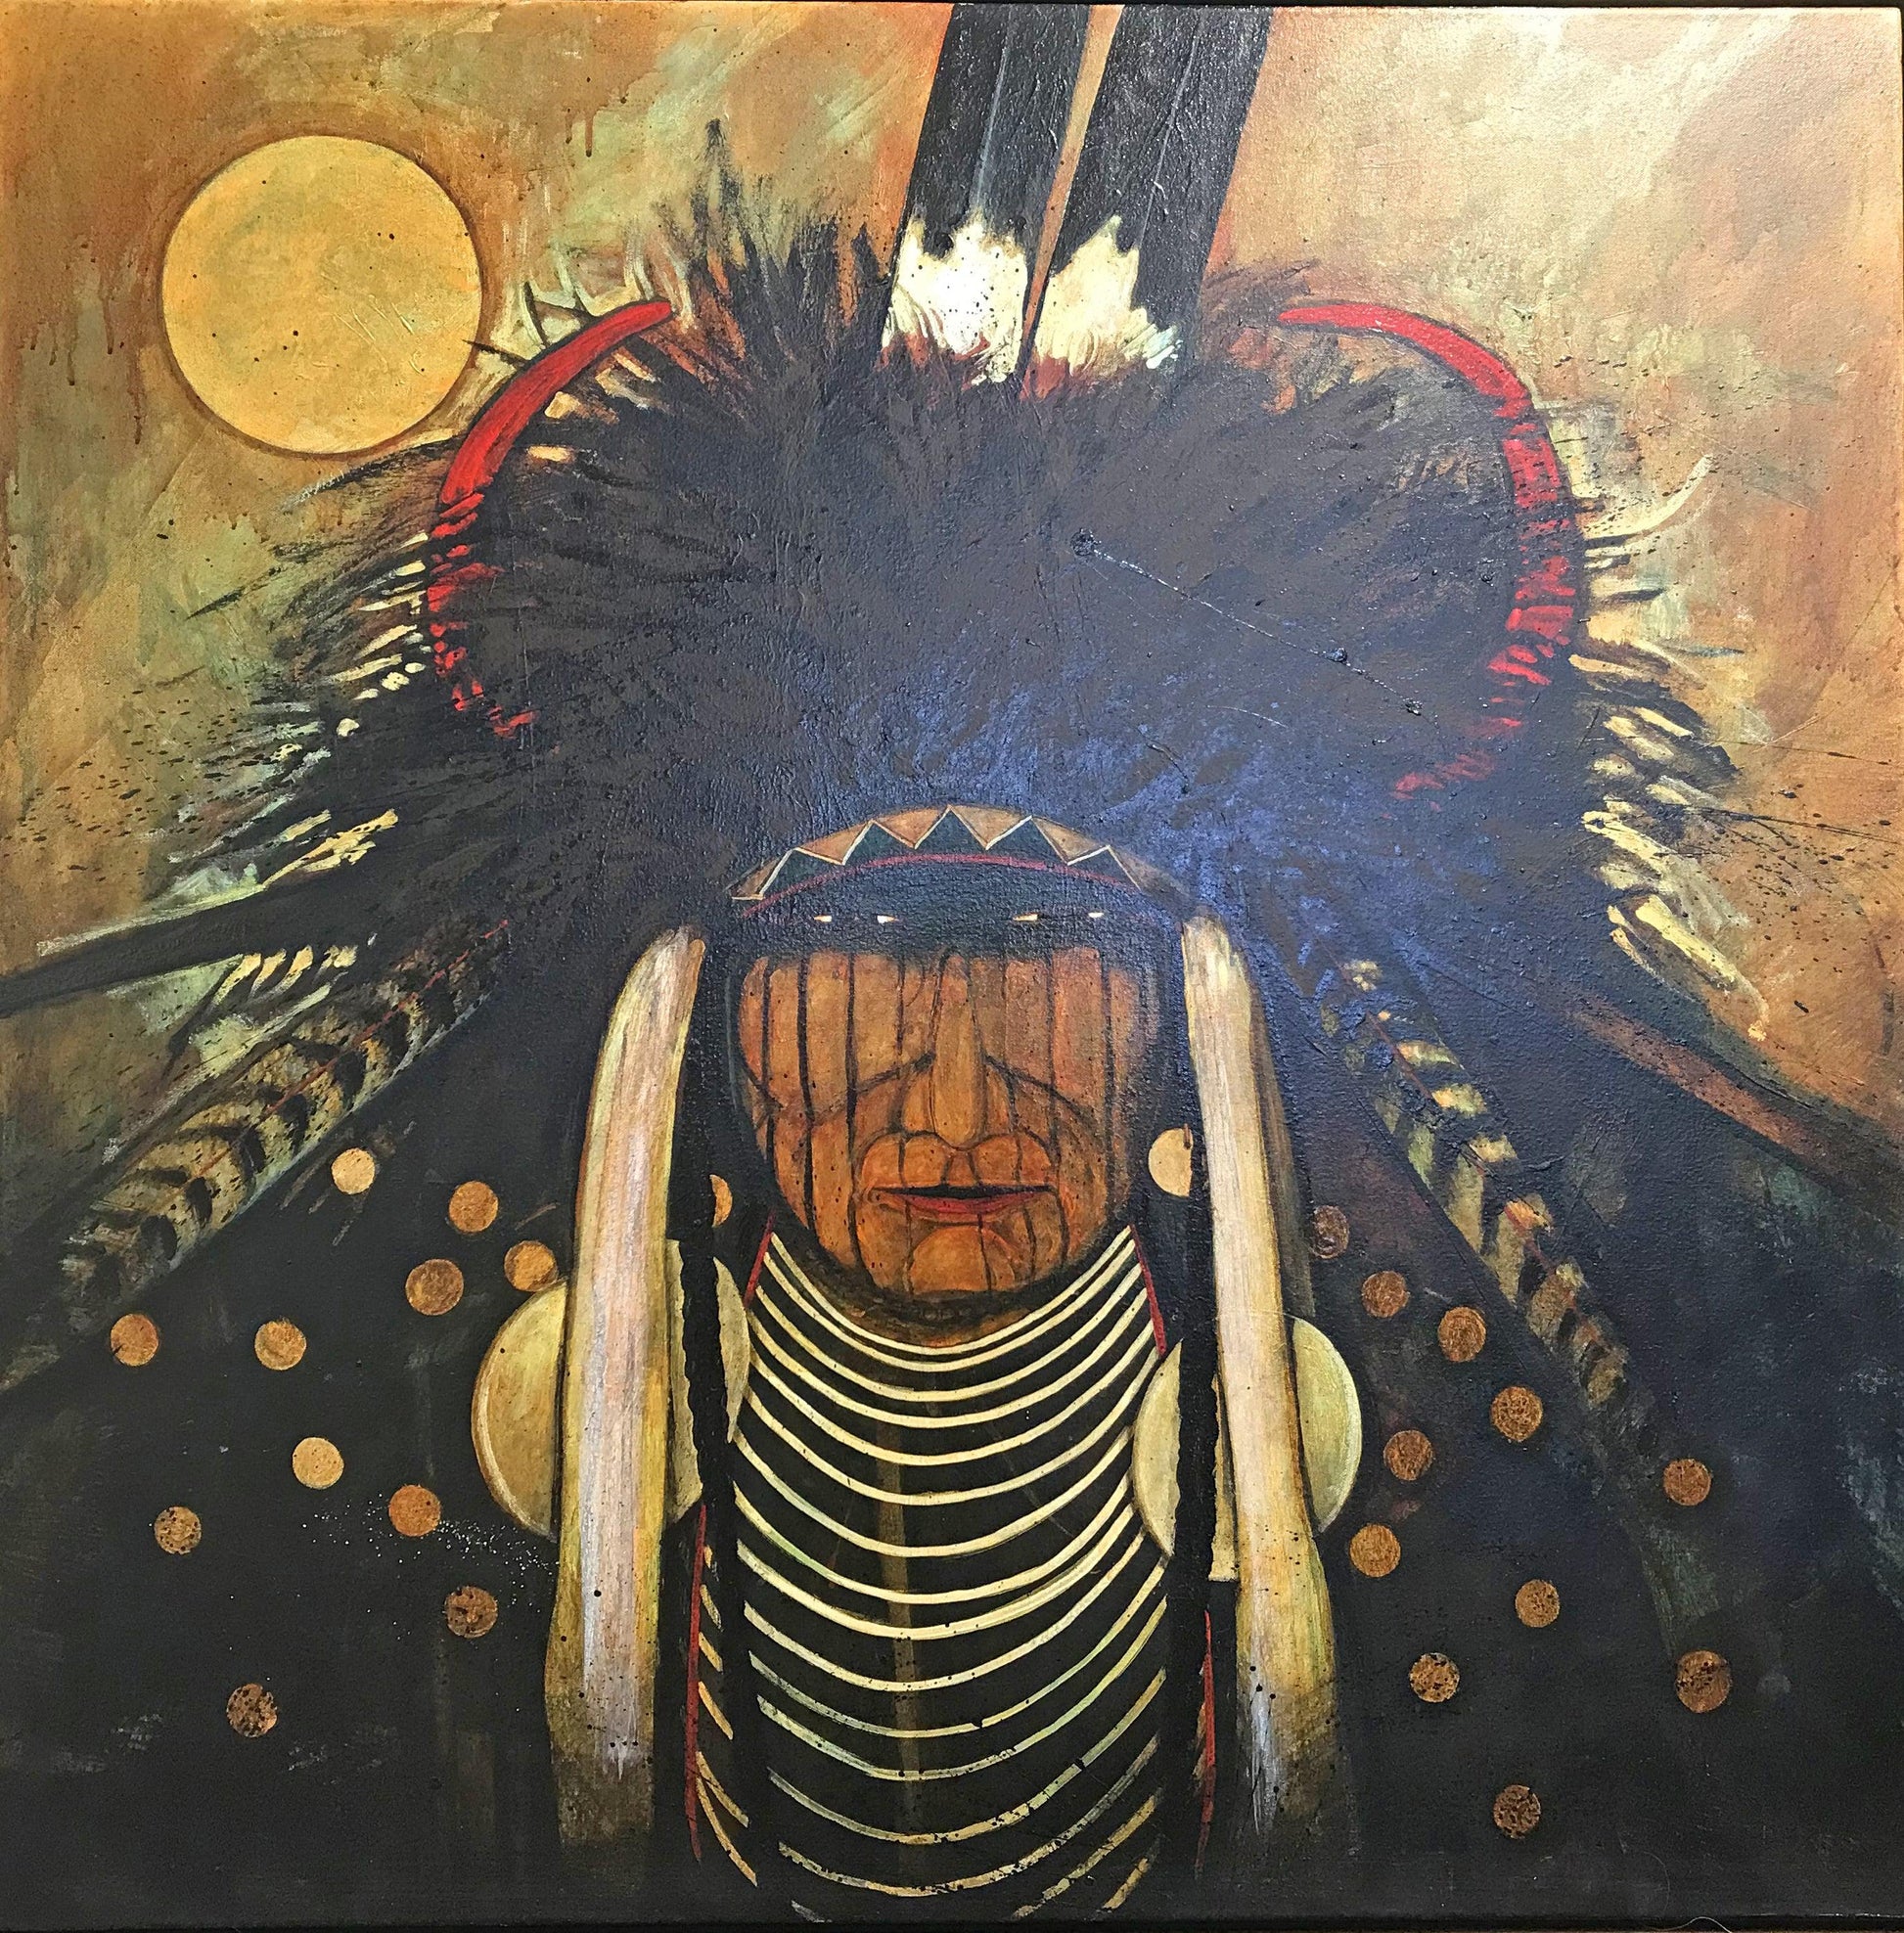 Giver of Blessings-Painting-Kevin Red Star-Sorrel Sky Gallery